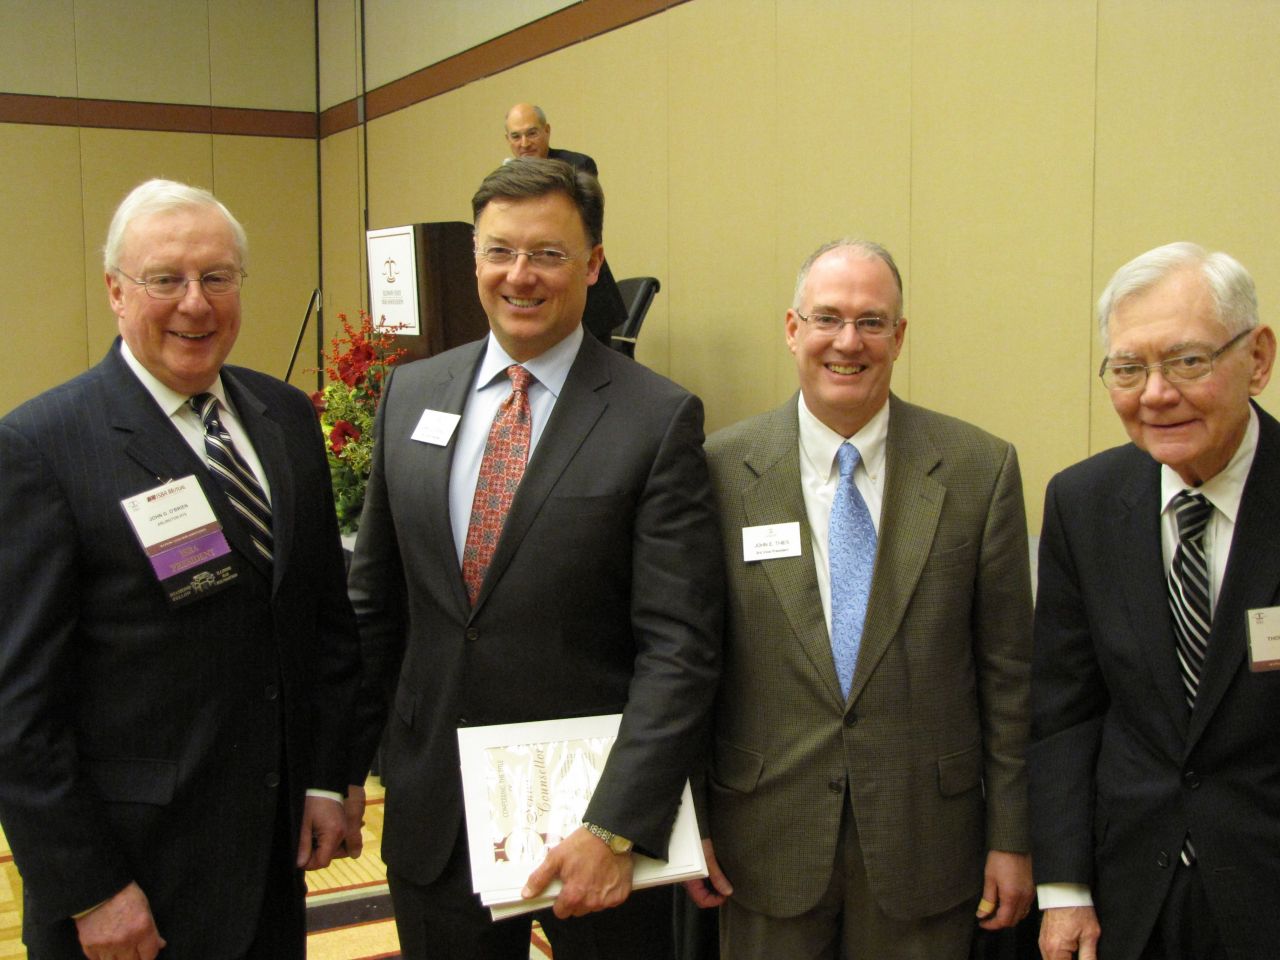 (Click to enlarge) ISBA President John O'Brien, ISBA 2nd Vice President John Locallo, ISBA 3rd Vice President John Thies and Illinois State Supreme Court Chief Justice Thomas Fitzgerald.